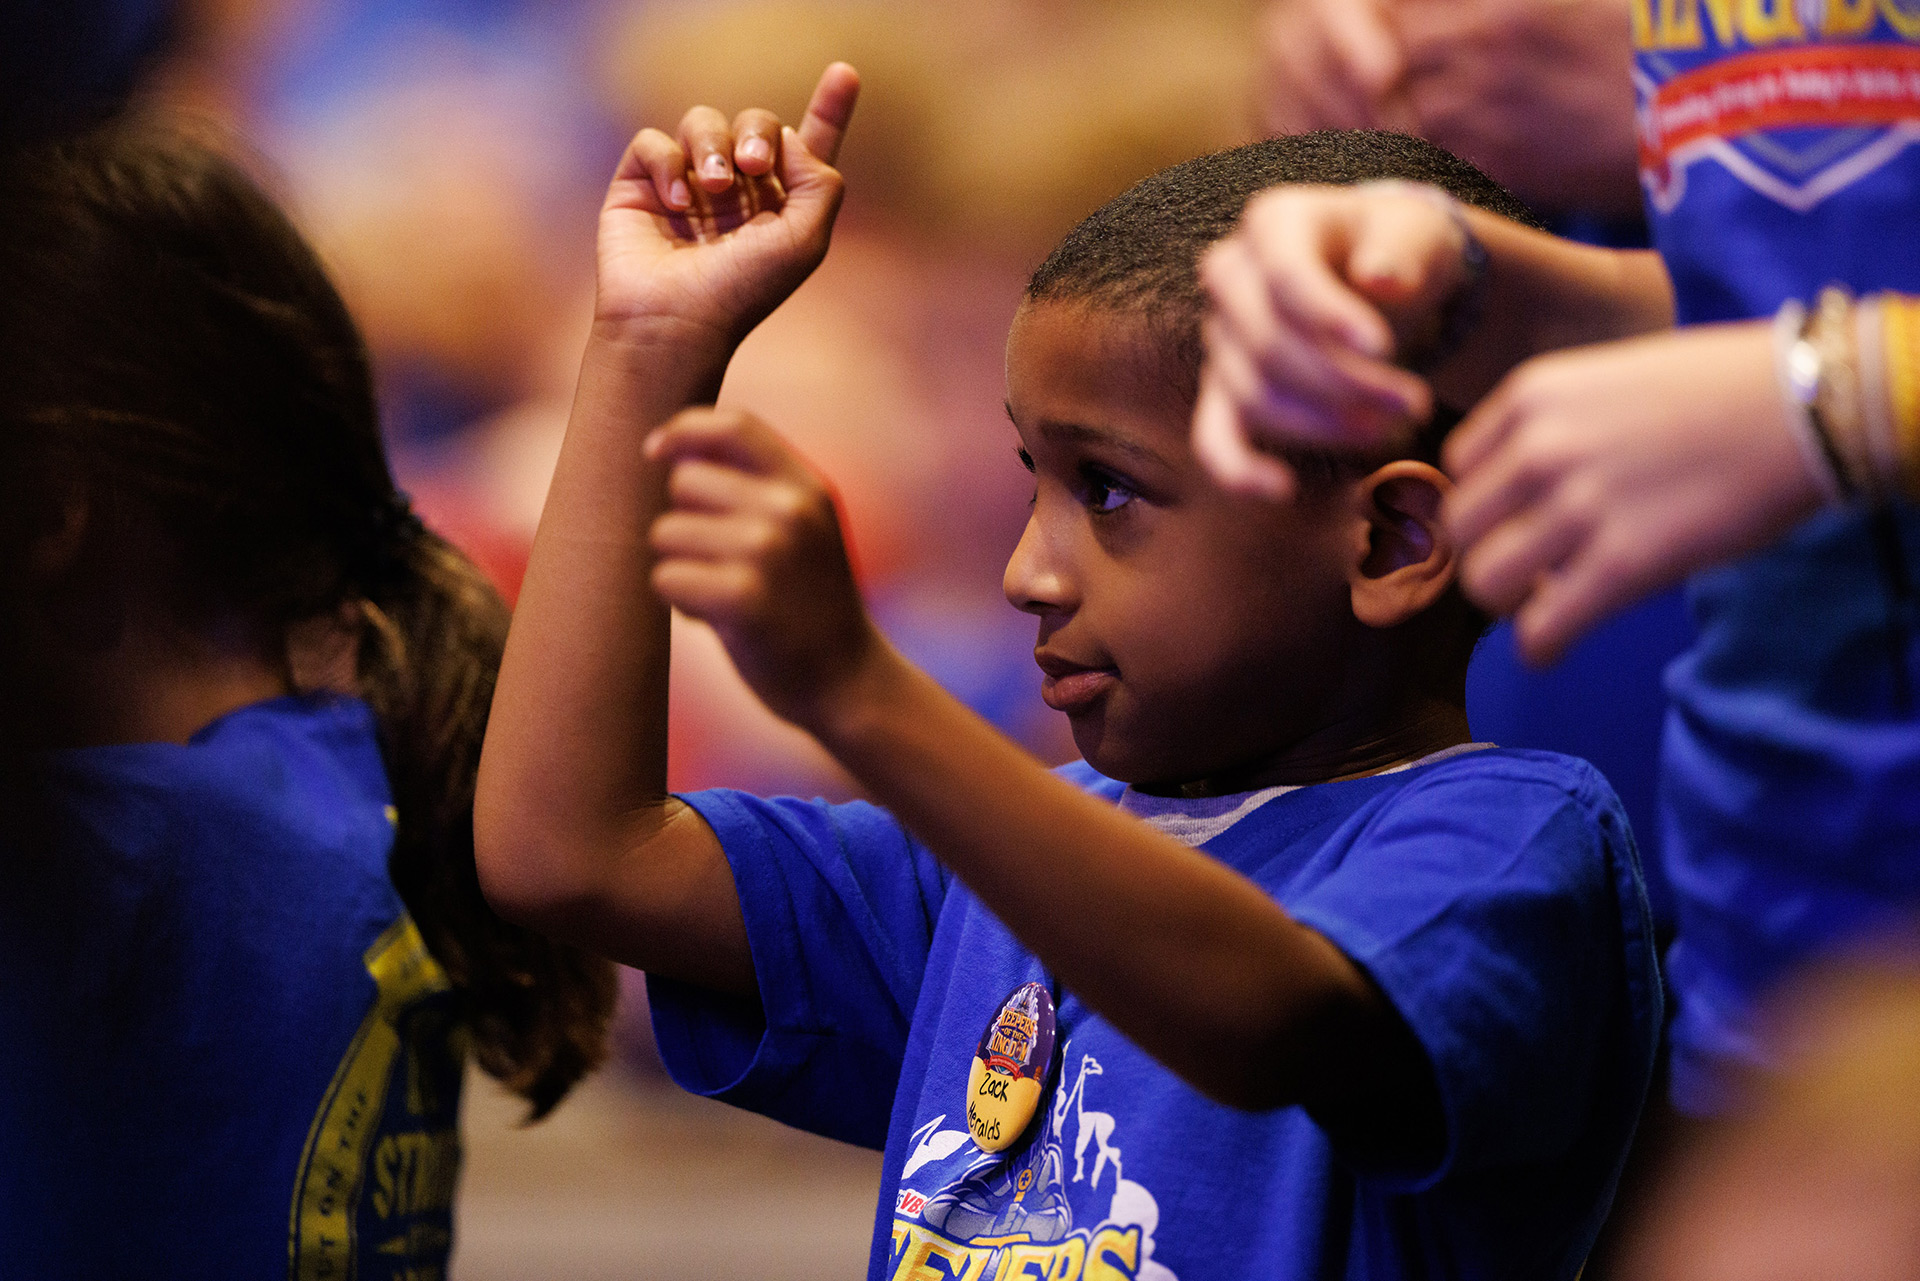 Children doing hand motions to VBS songs